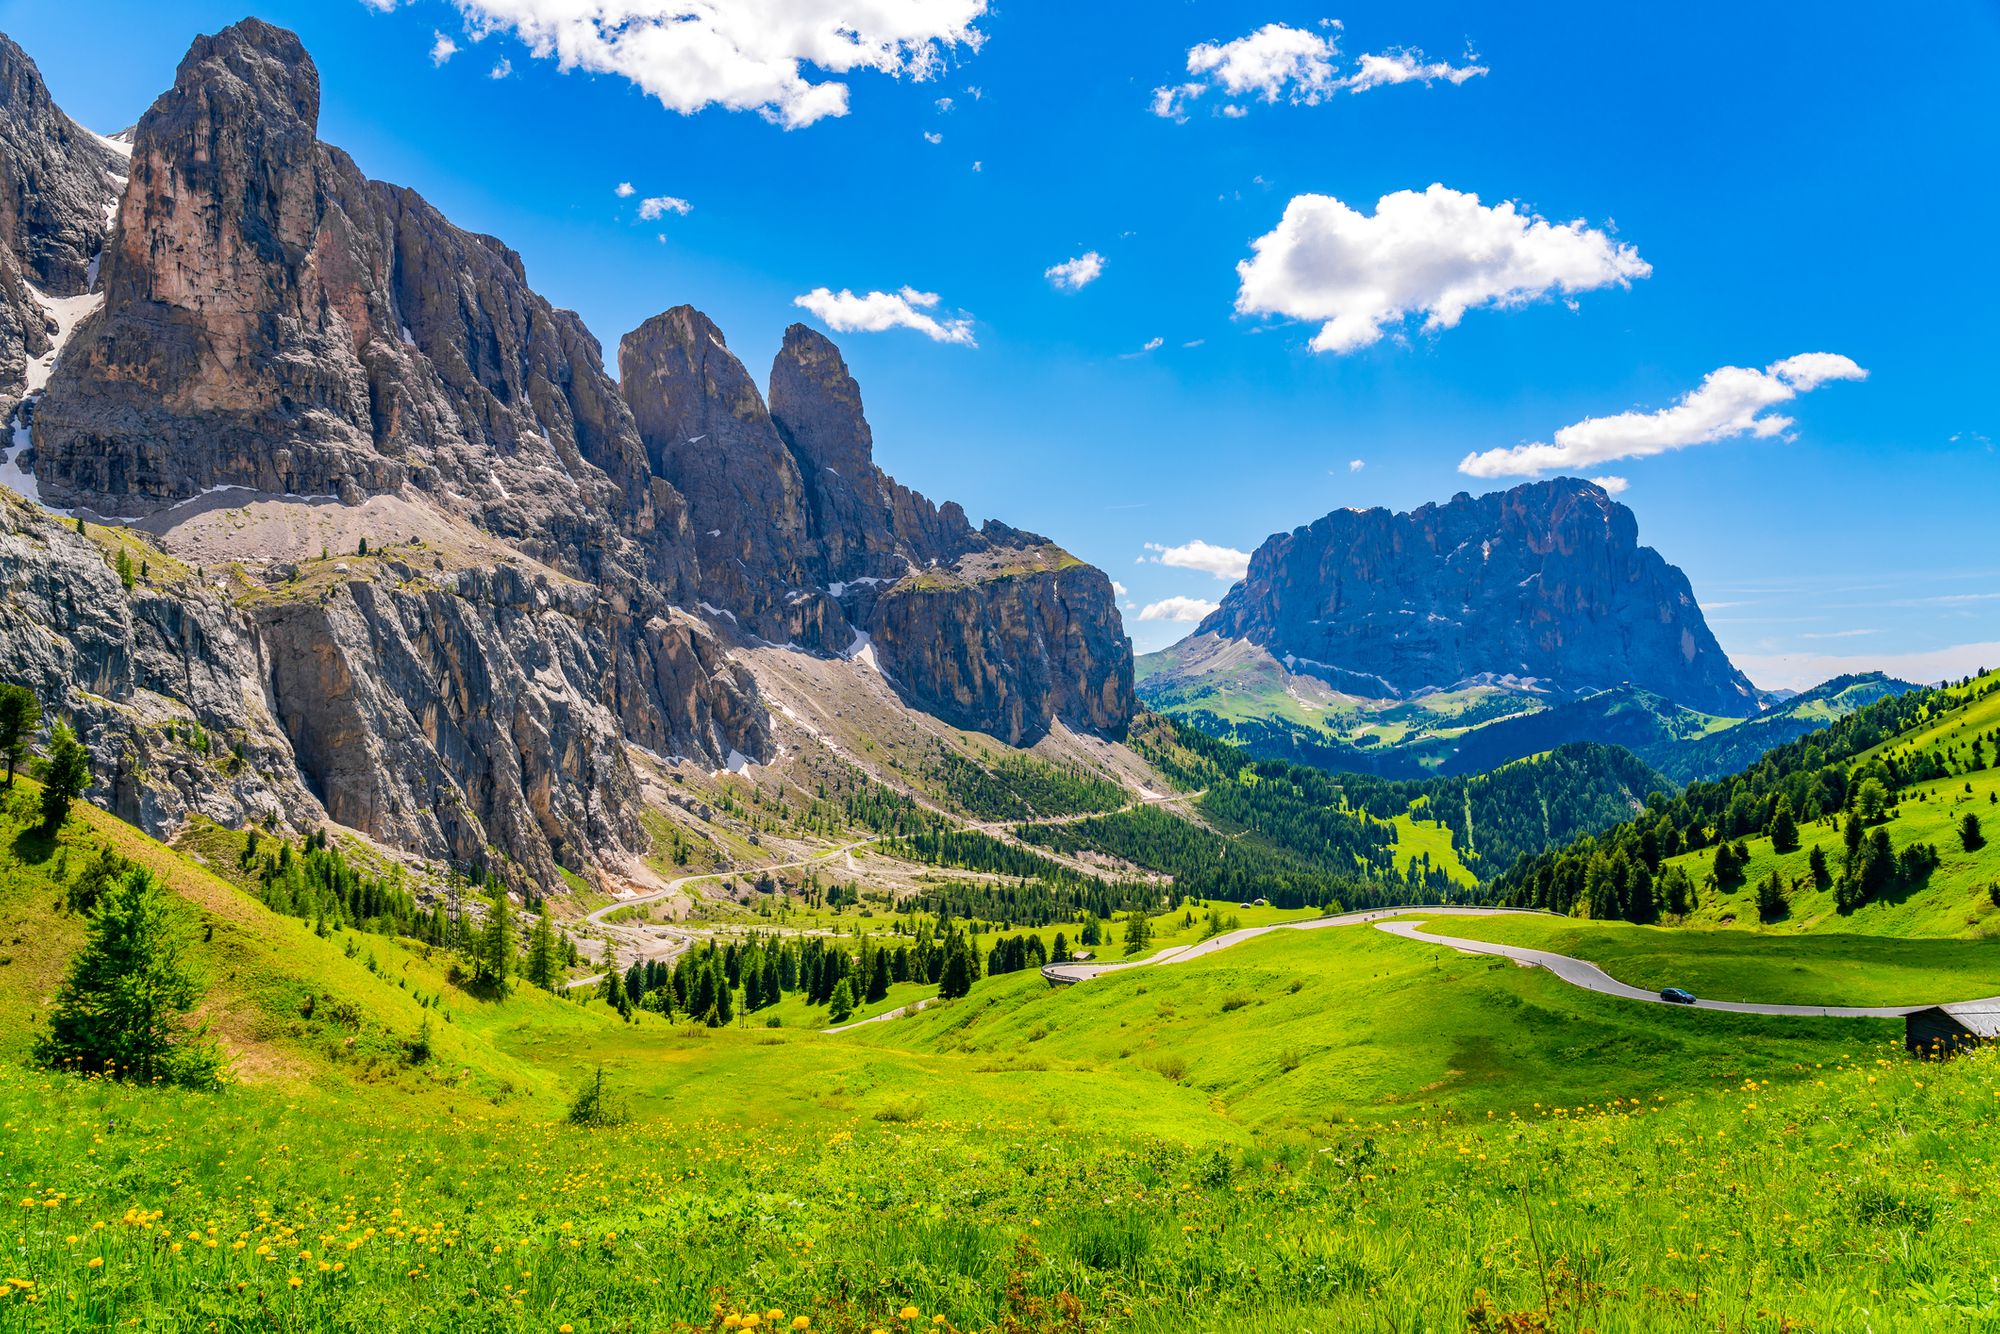 The Gardena Pass in the Dolomites, with Monte Sassolungo in the background